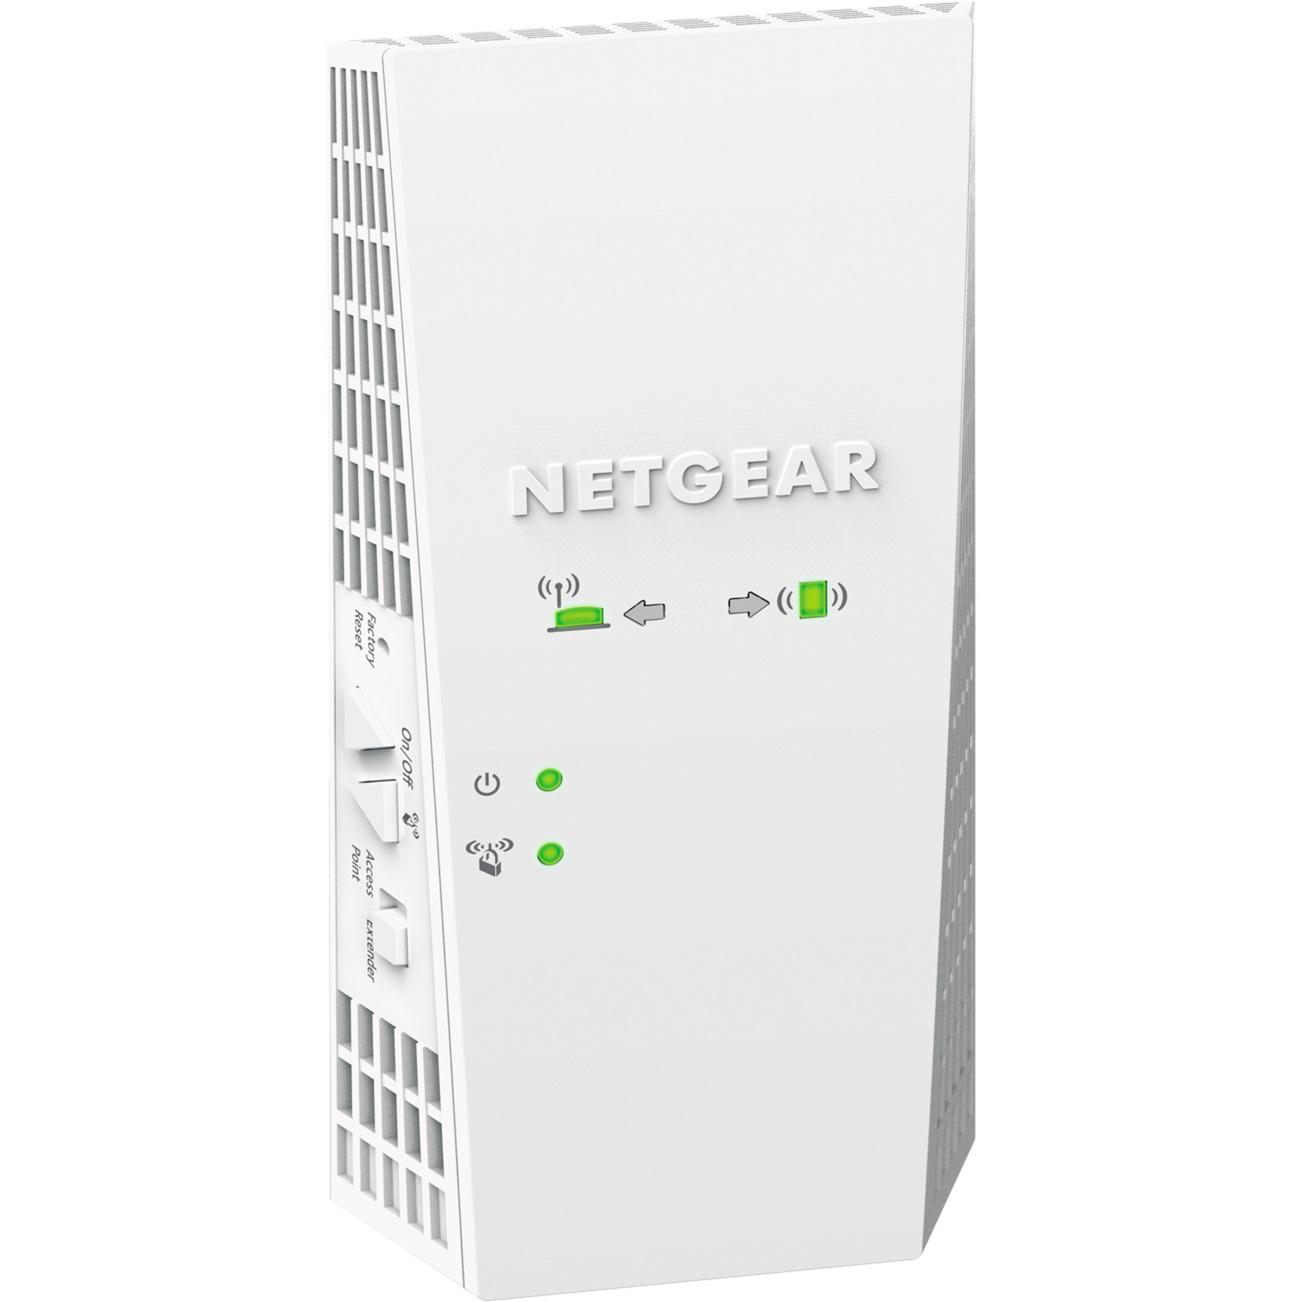 Access point 1750 Mb/s